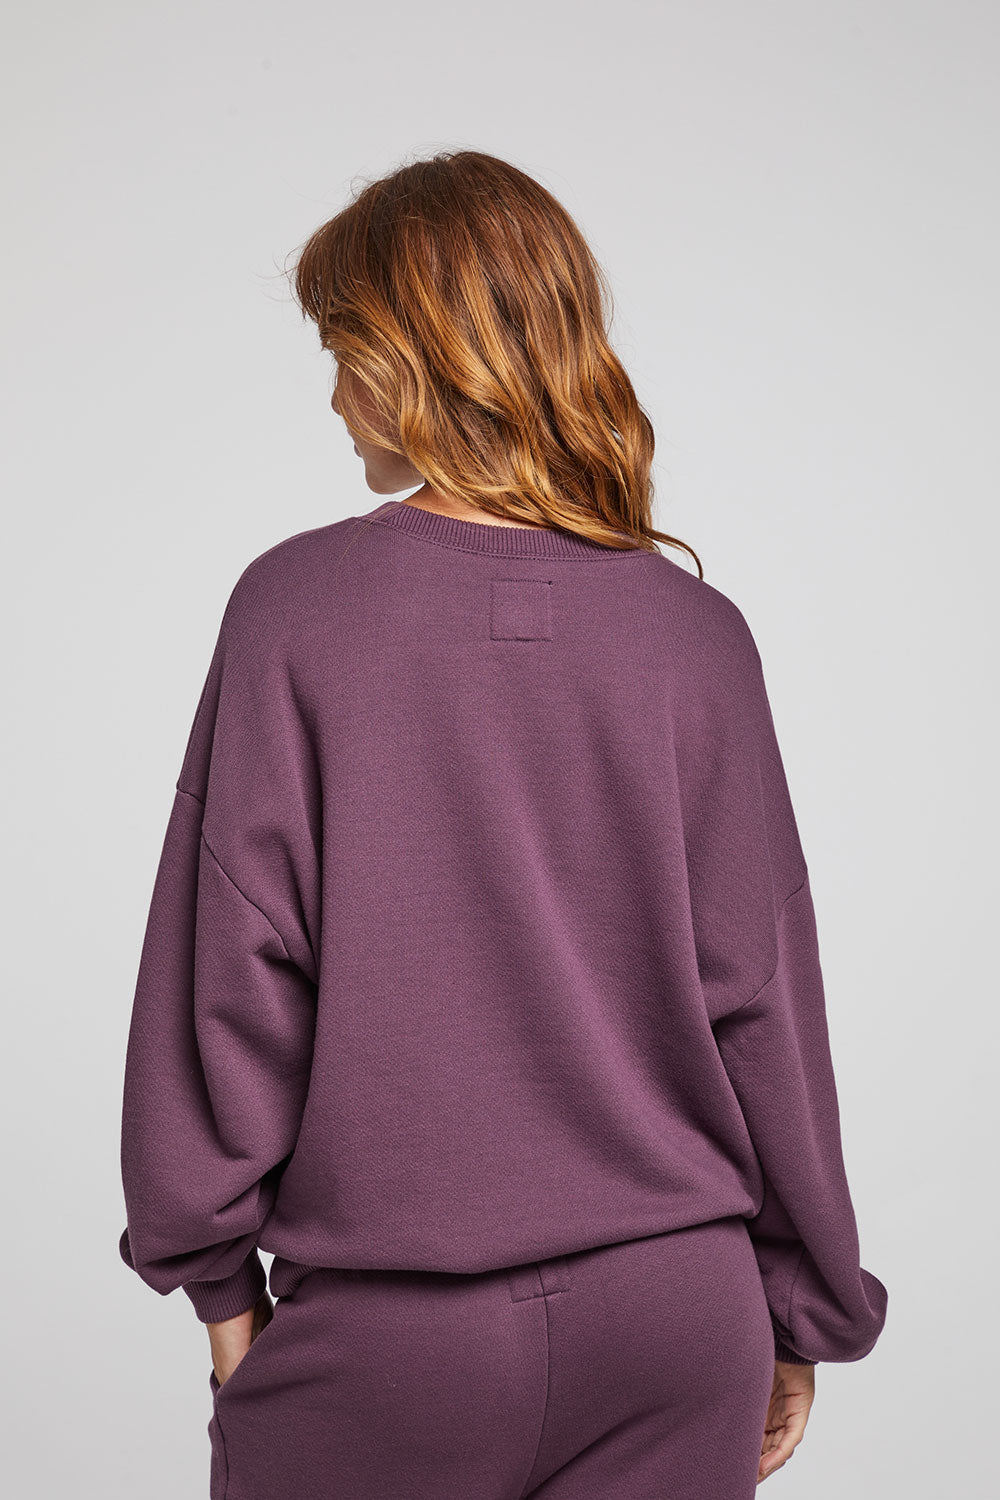 chaser-casbah-plum-pullover-04